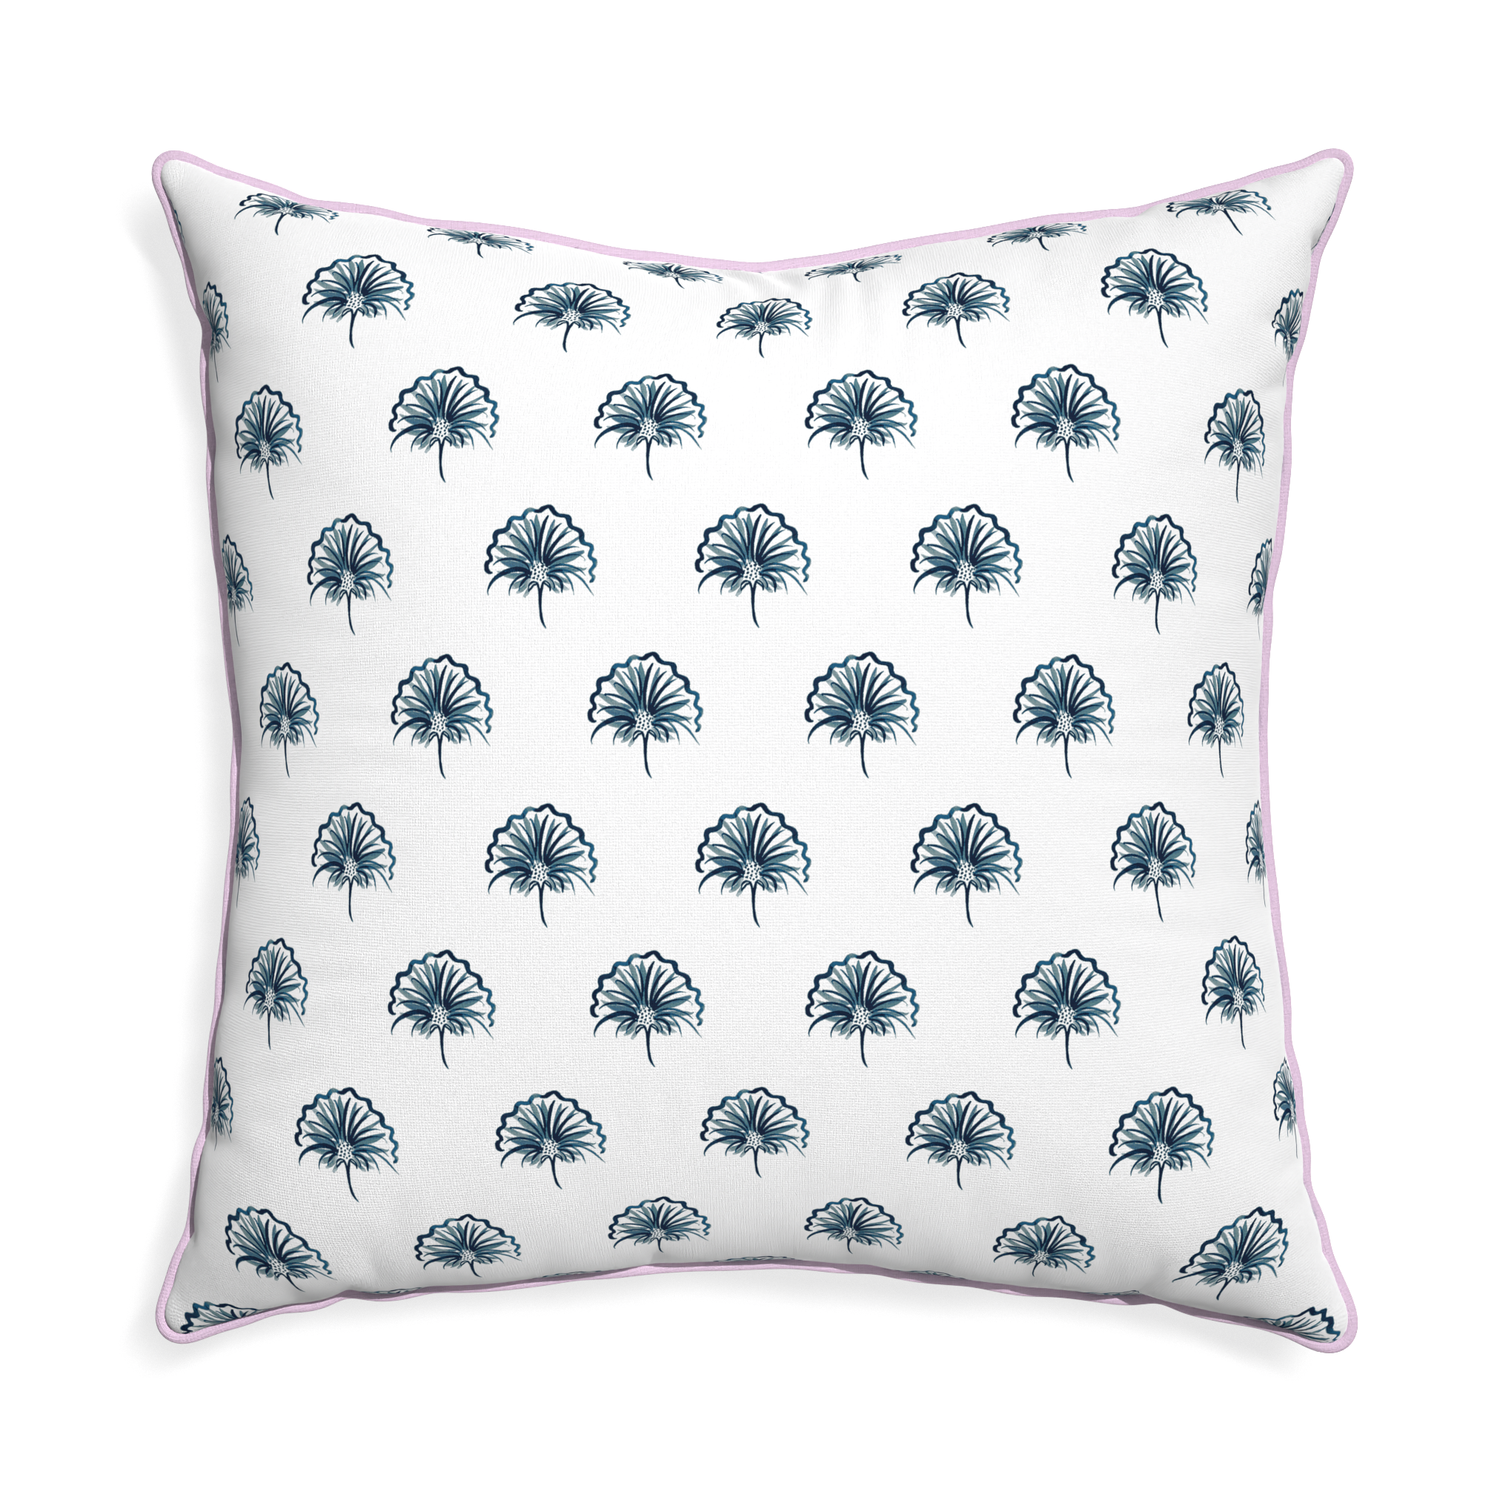 Euro-sham penelope midnight custom floral navypillow with l piping on white background